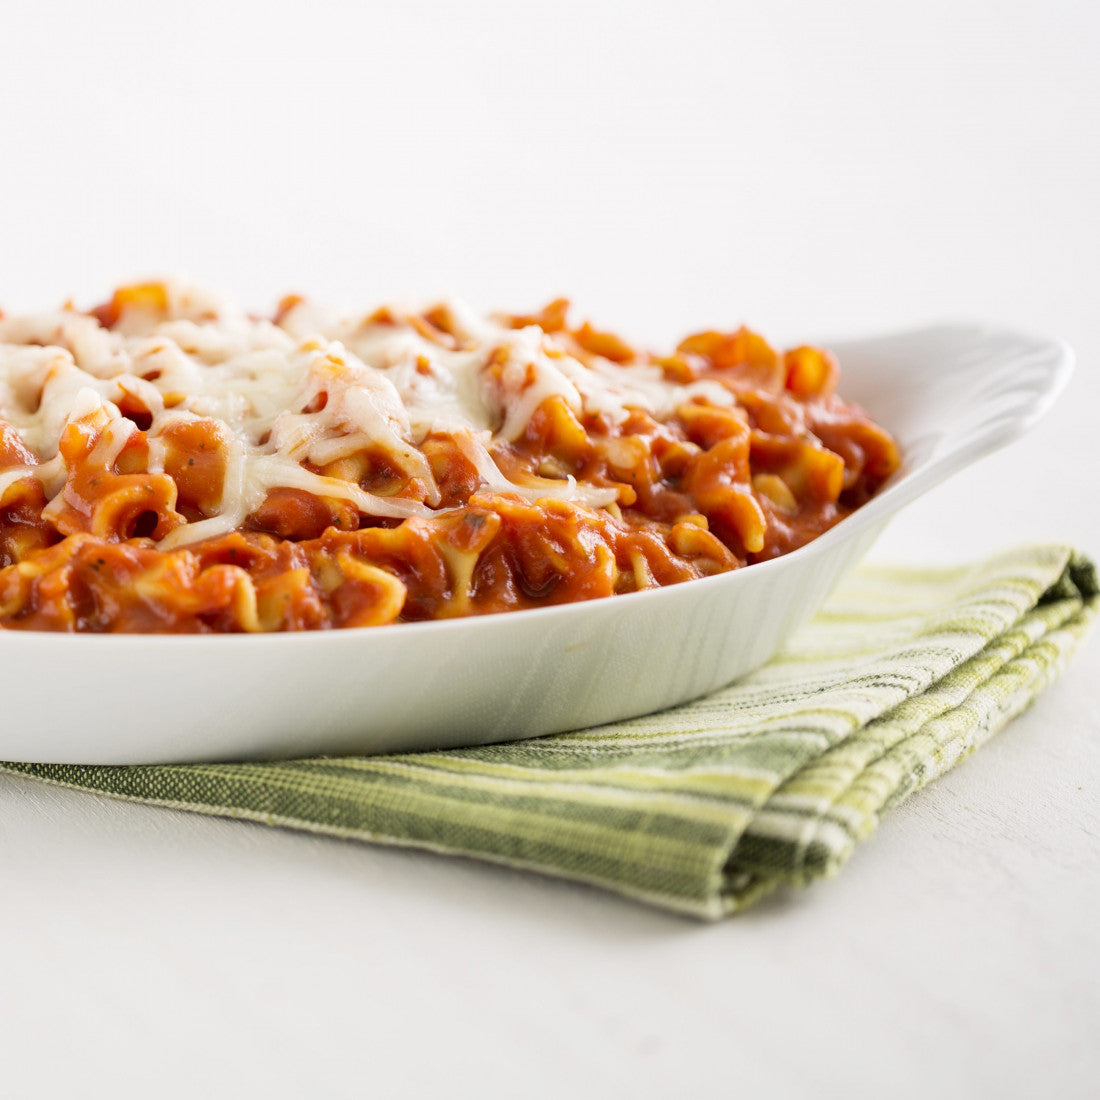 Customers love our Italiano Marinara Pasta because it’s anything but basic